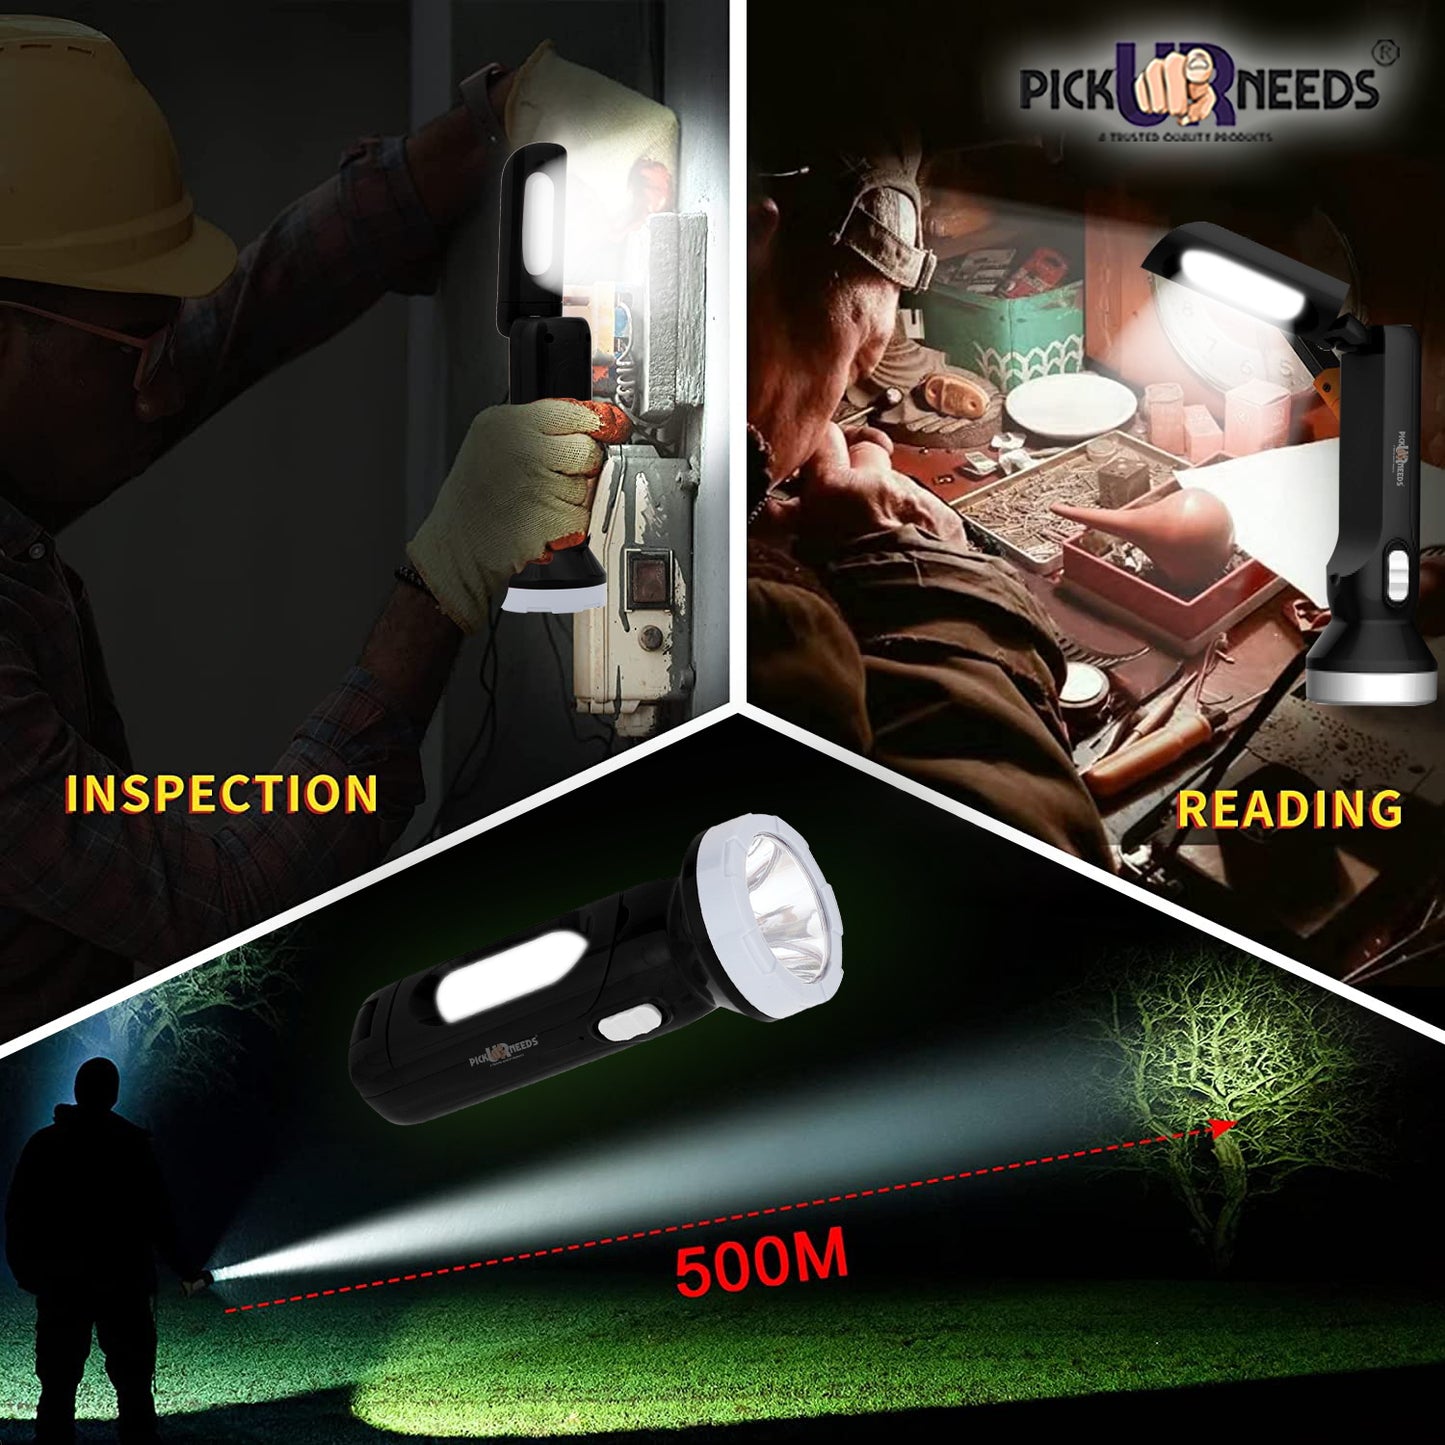 Pick Ur Needs Home Rechargeable 2 in 1 Torch + Table Lamp With 6 hrs Torch Emergency Light